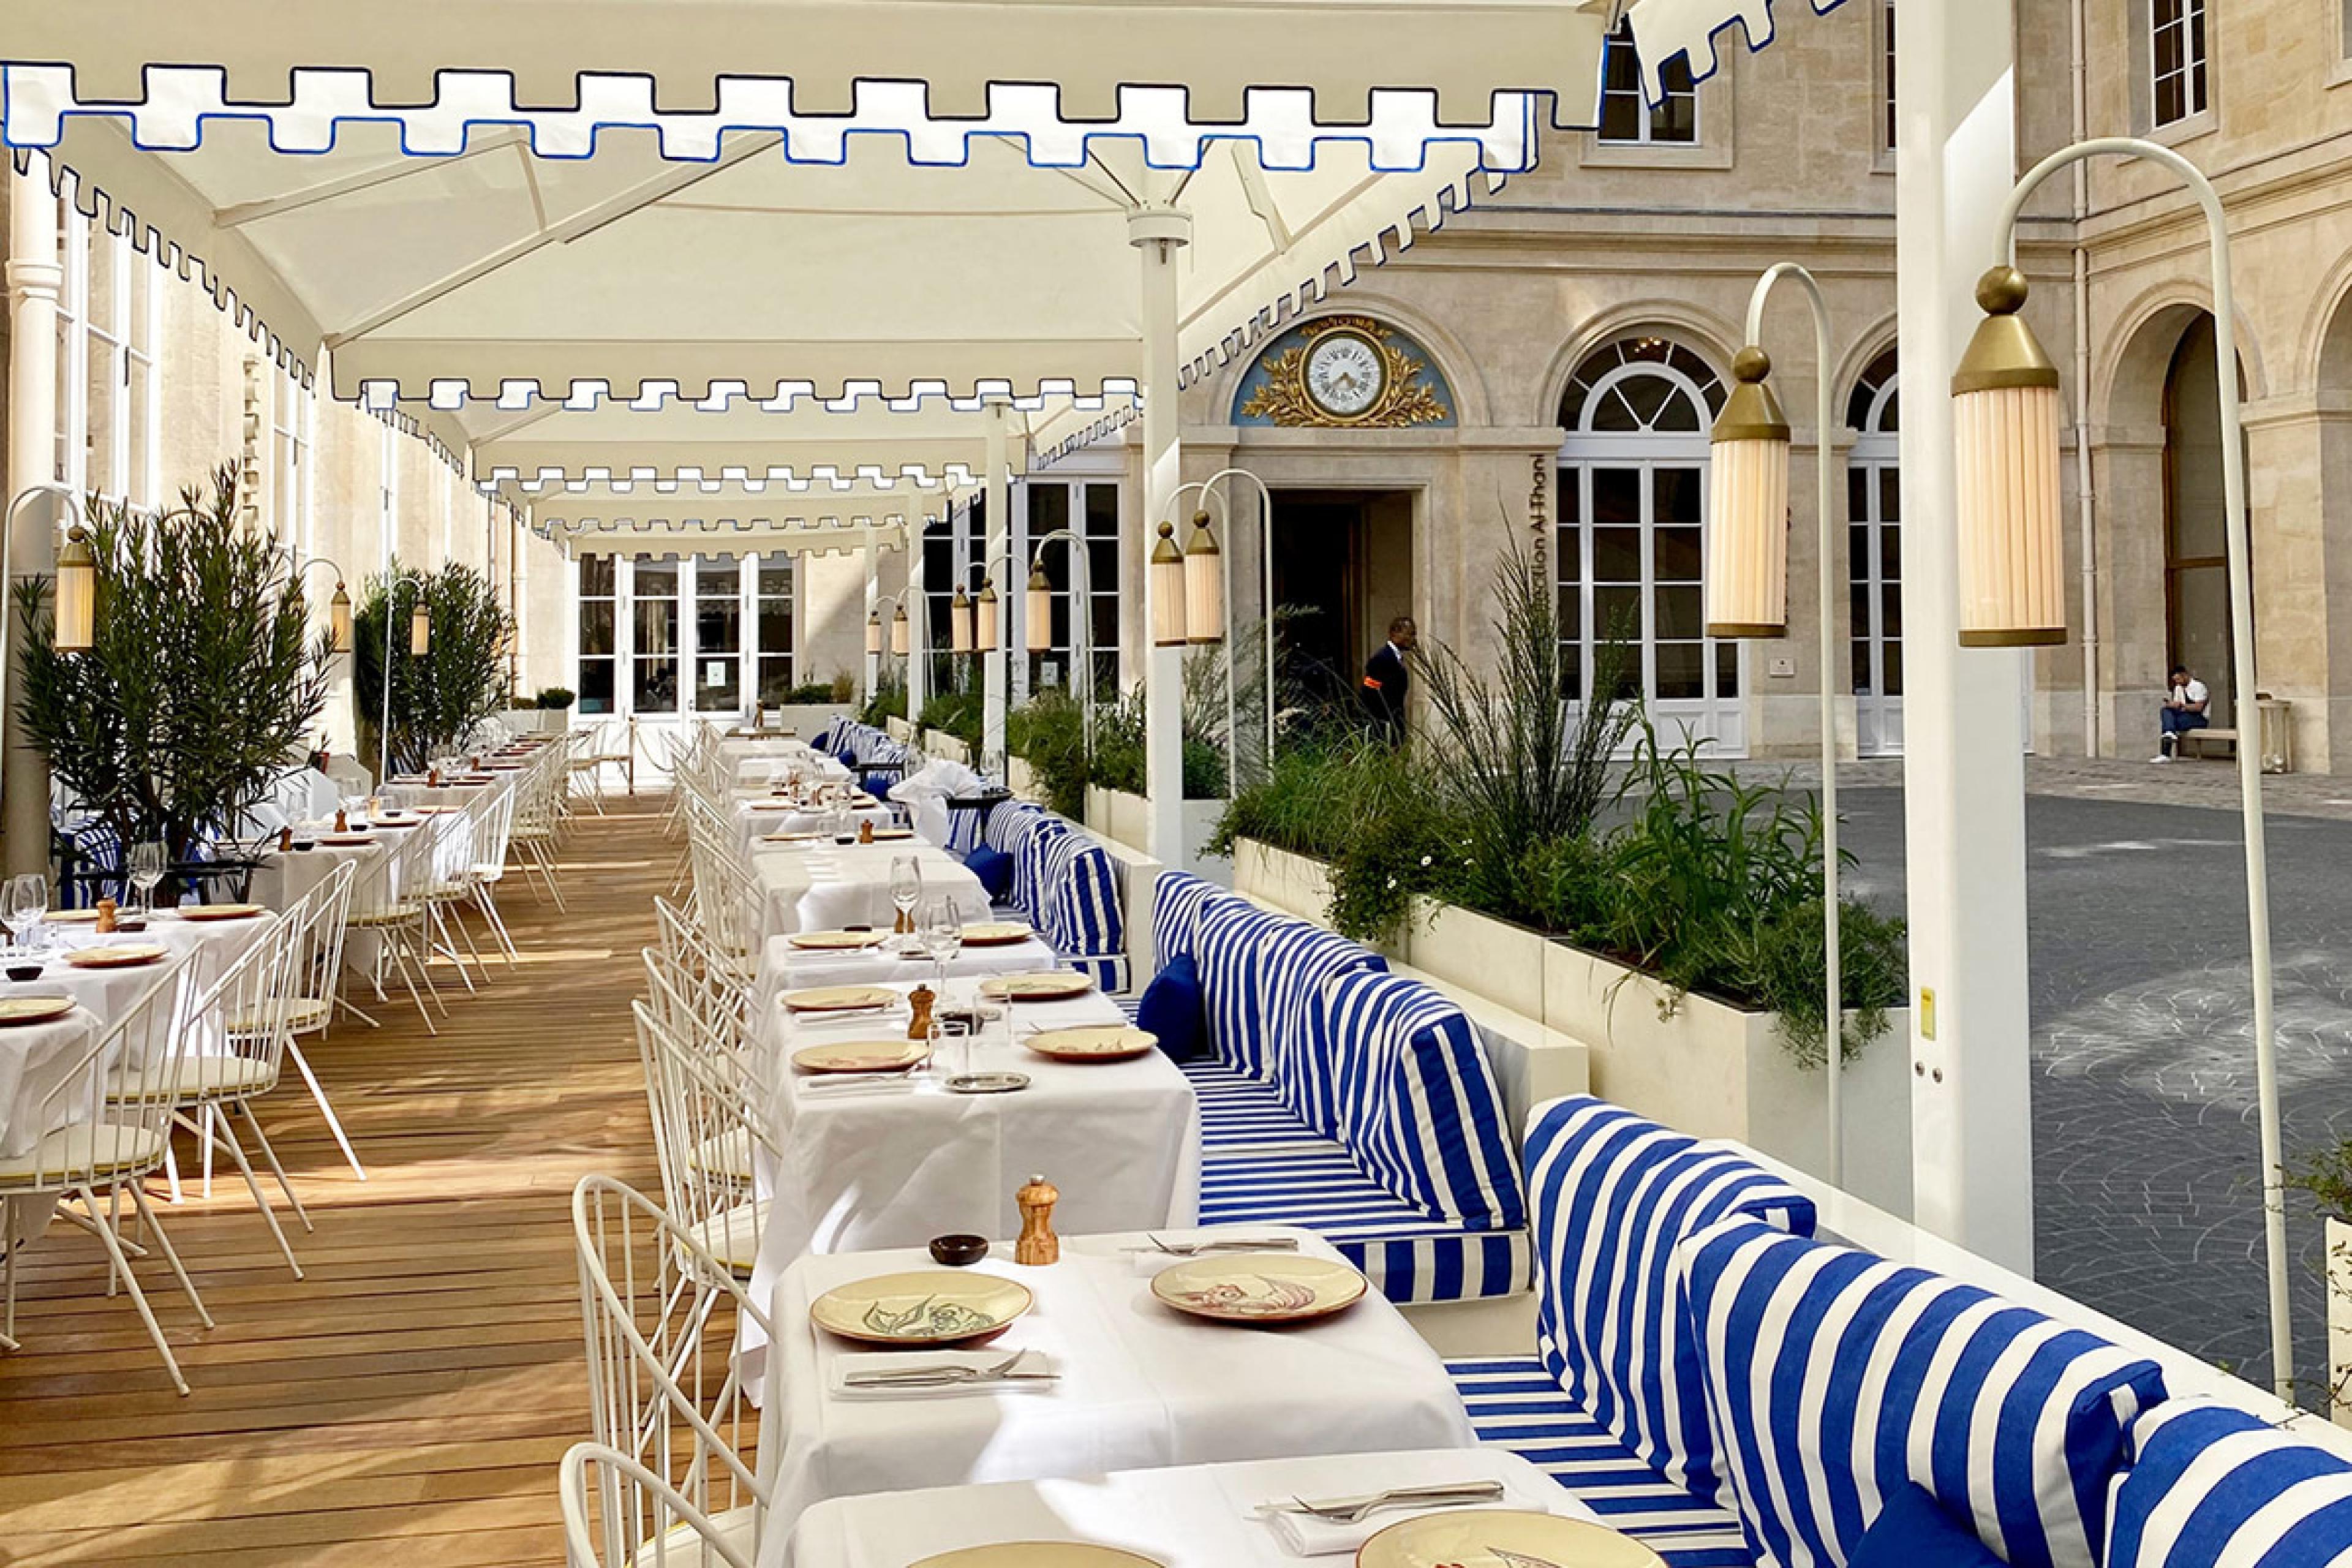 restaurant seating outside under white umbrellas in paris with blue seats